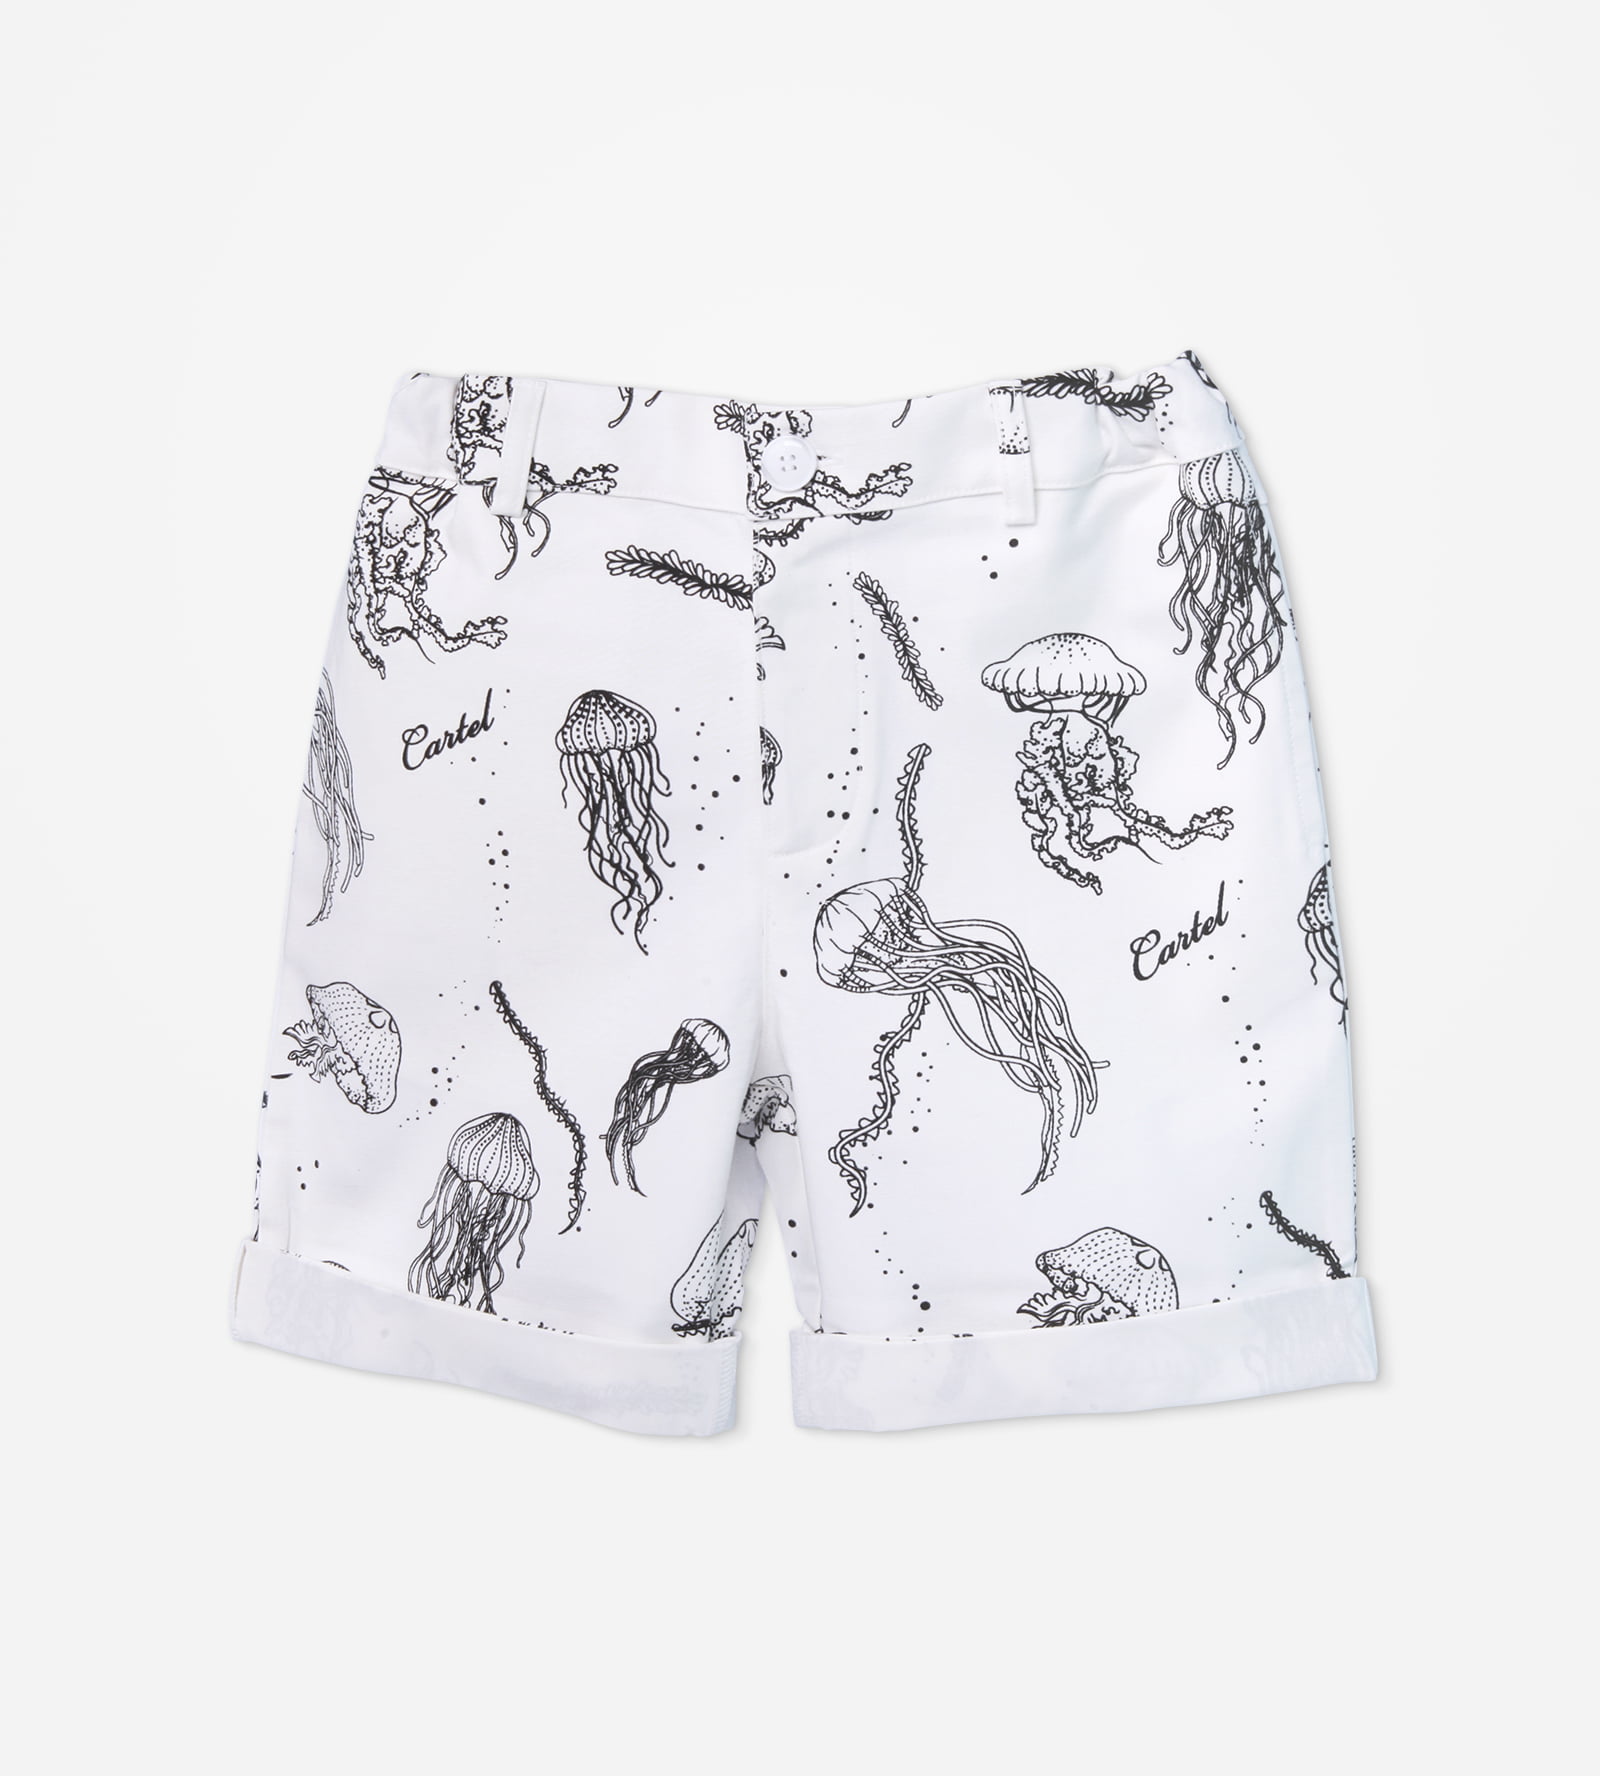 JELLY FISH SHORTS/ WHITE - Cartelkids